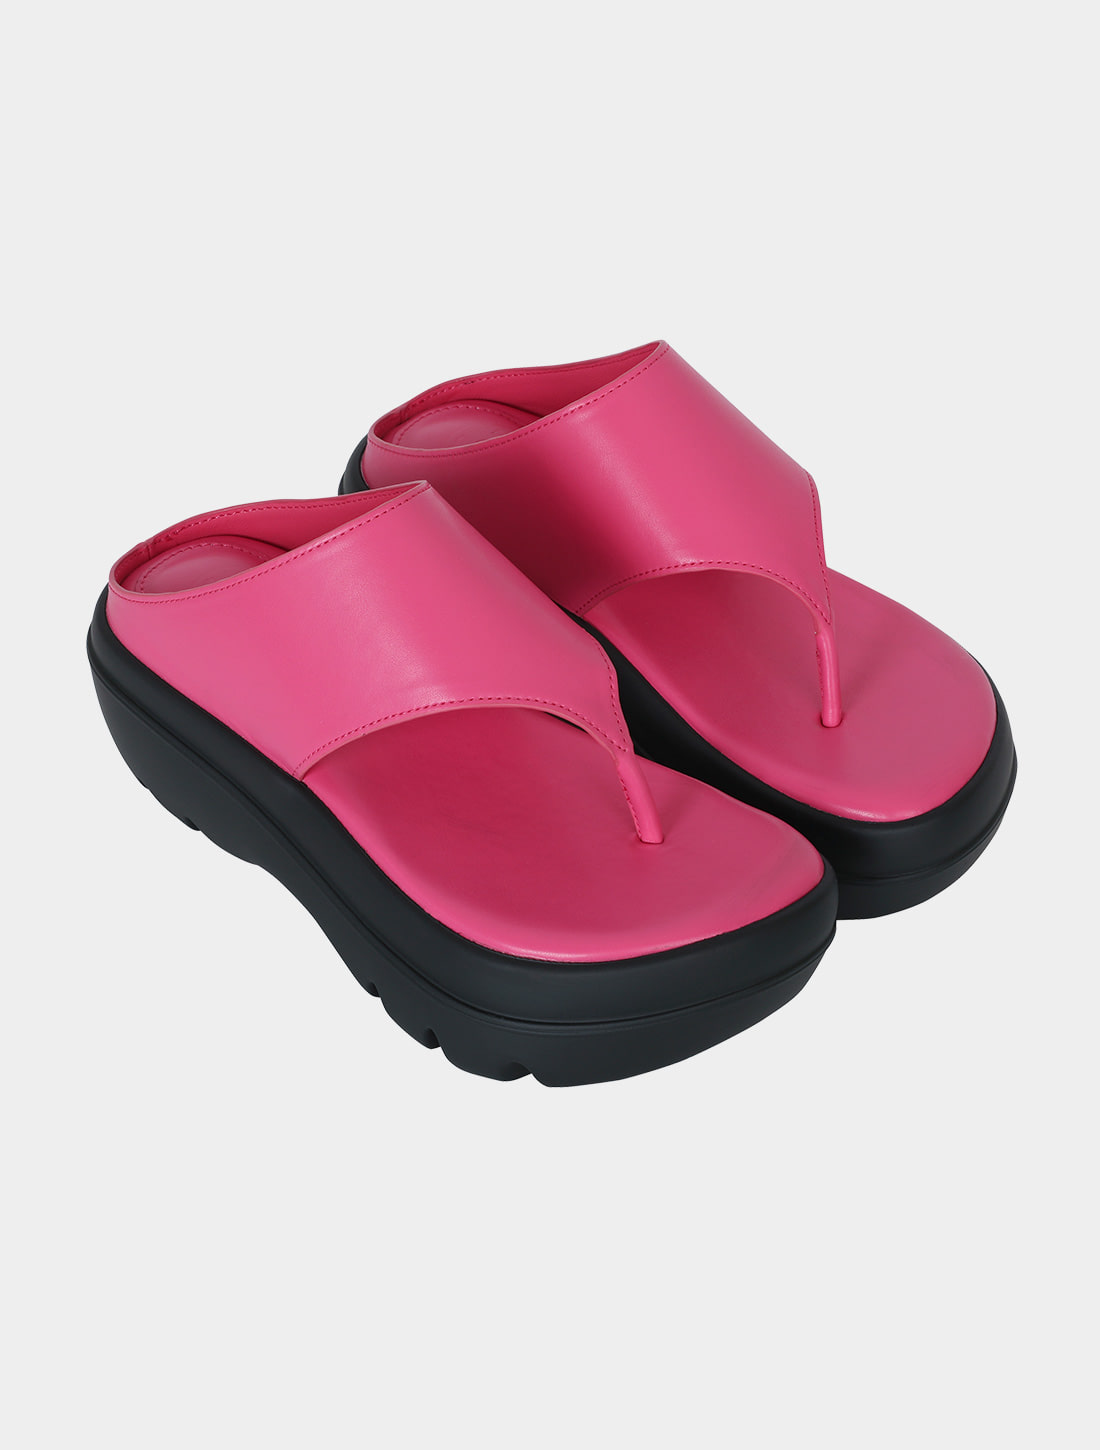 Kisyning flip flop slippers (pink)